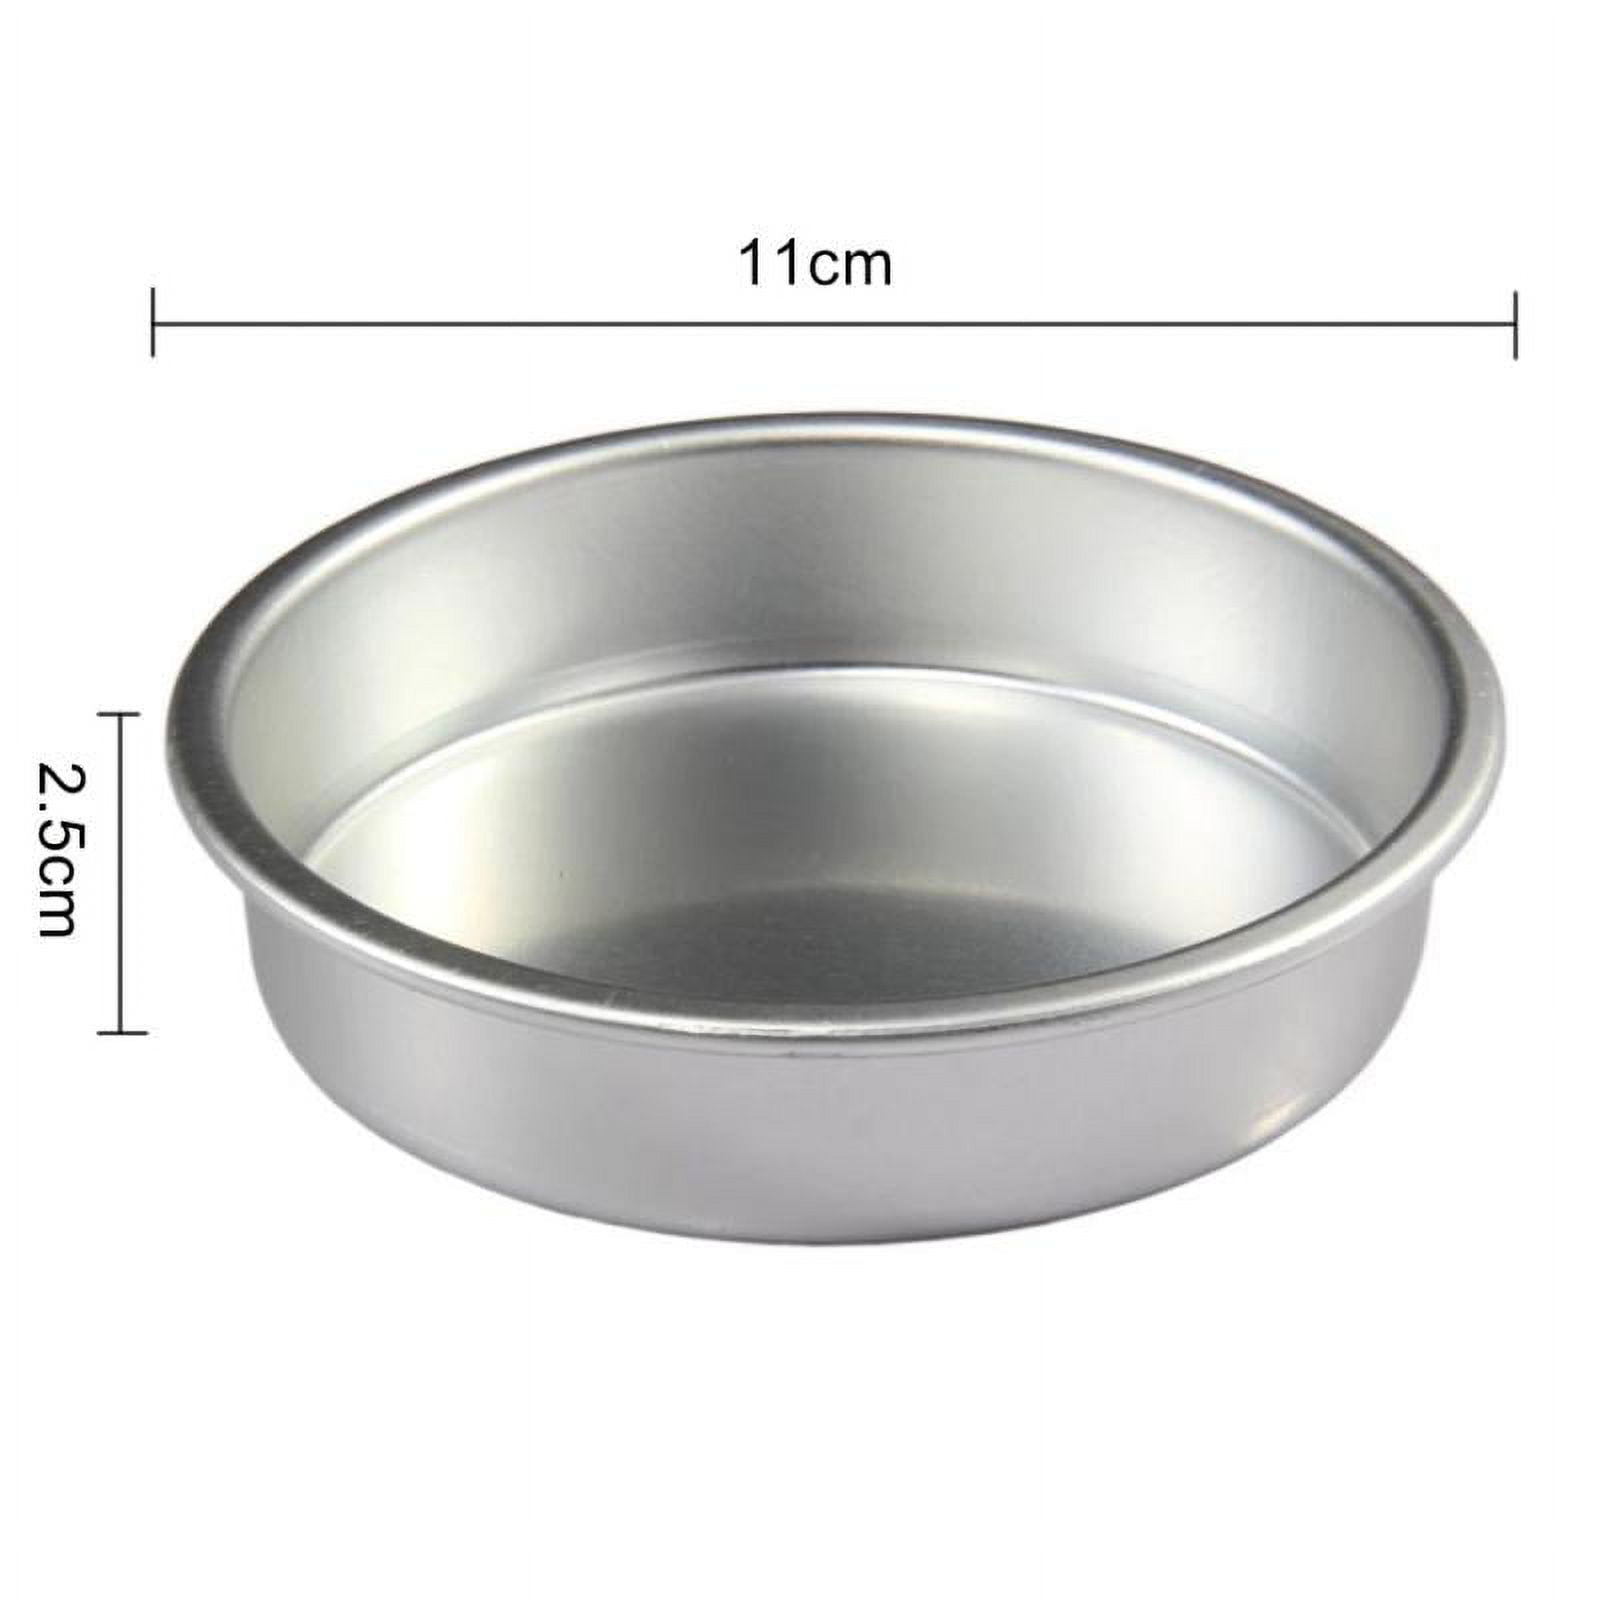 P&P CHEF 153Pcs Cake Baking Pan Set Decorating Supplies Kit, Stainless  Steel 4/6/8/9.5 Inch Cake Pans with Icing Tips Tools, Parchment Papers,  Whisk